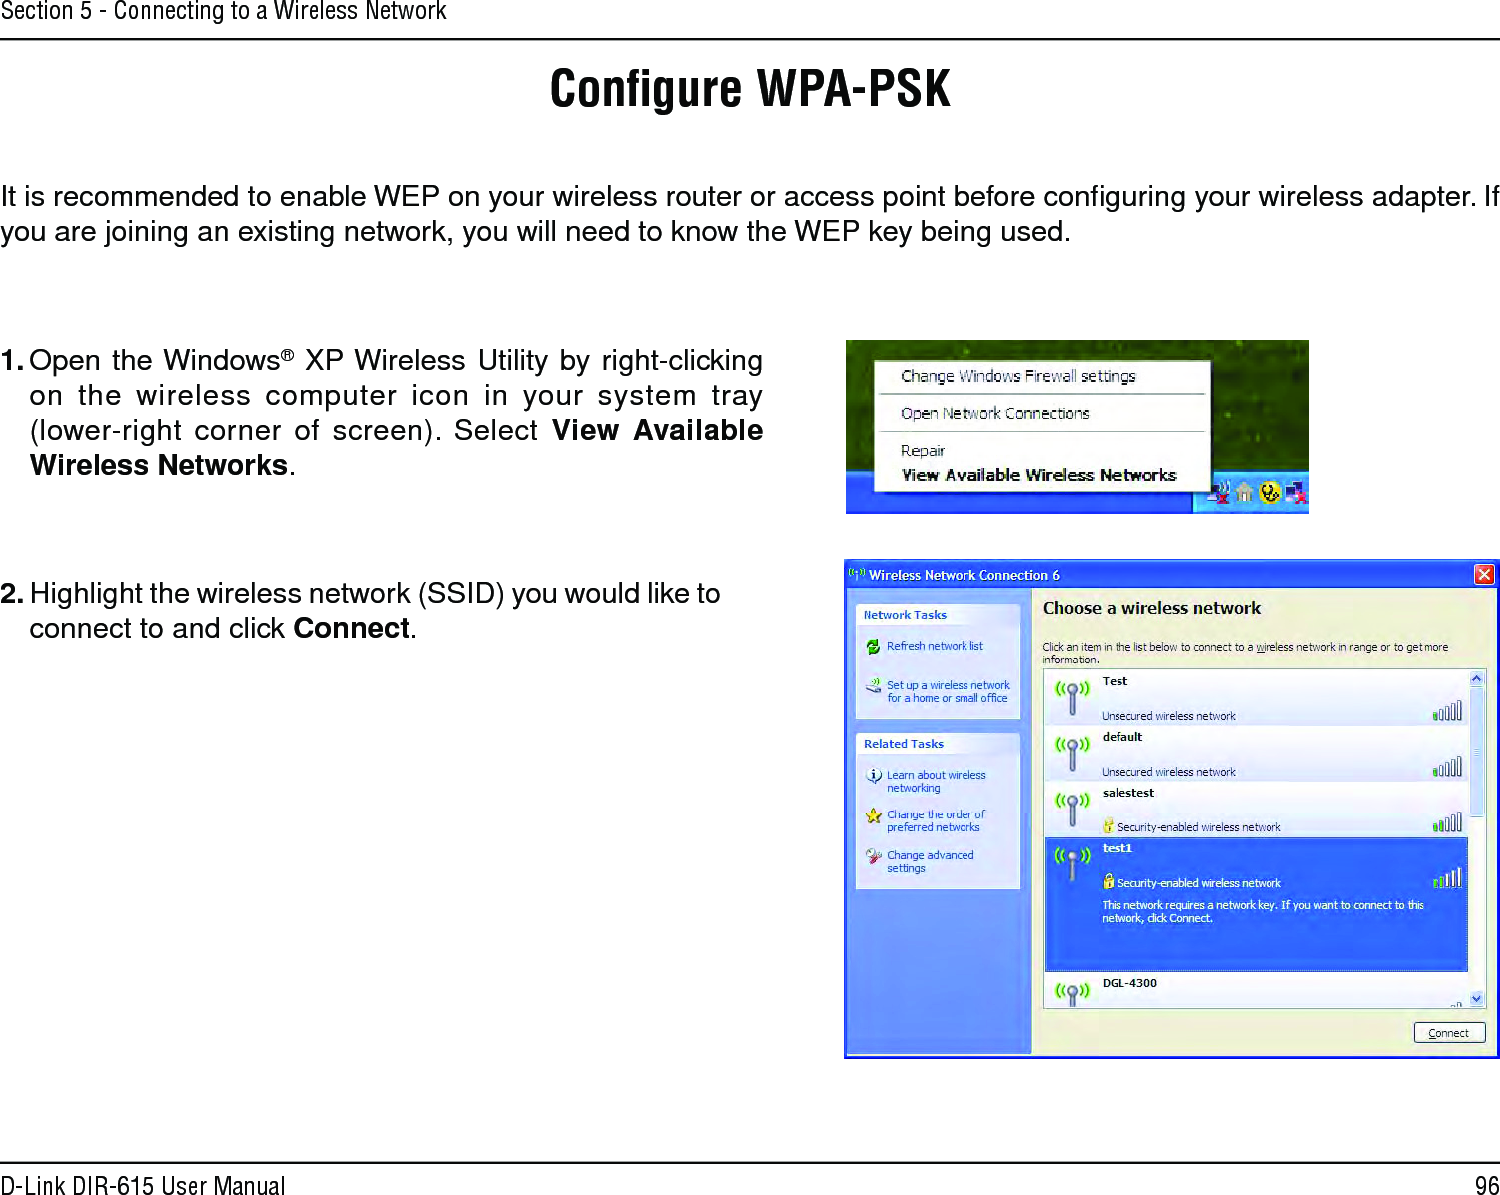 96D-Link DIR-615 User ManualSection 5 - Connecting to a Wireless NetworkConﬁgure WPA-PSKIt is recommended to enable WEP on your wireless router or access point before conﬁguring your wireless adapter. If you are joining an existing network, you will need to know the WEP key being used.2. Highlight the wireless network (SSID) you would like to connect to and click Connect.1. Open the Windows® XP Wireless Utility by right-clicking on the wireless computer icon in your system tray  (lower-right corner of screen). Select View  Available Wireless Networks. 